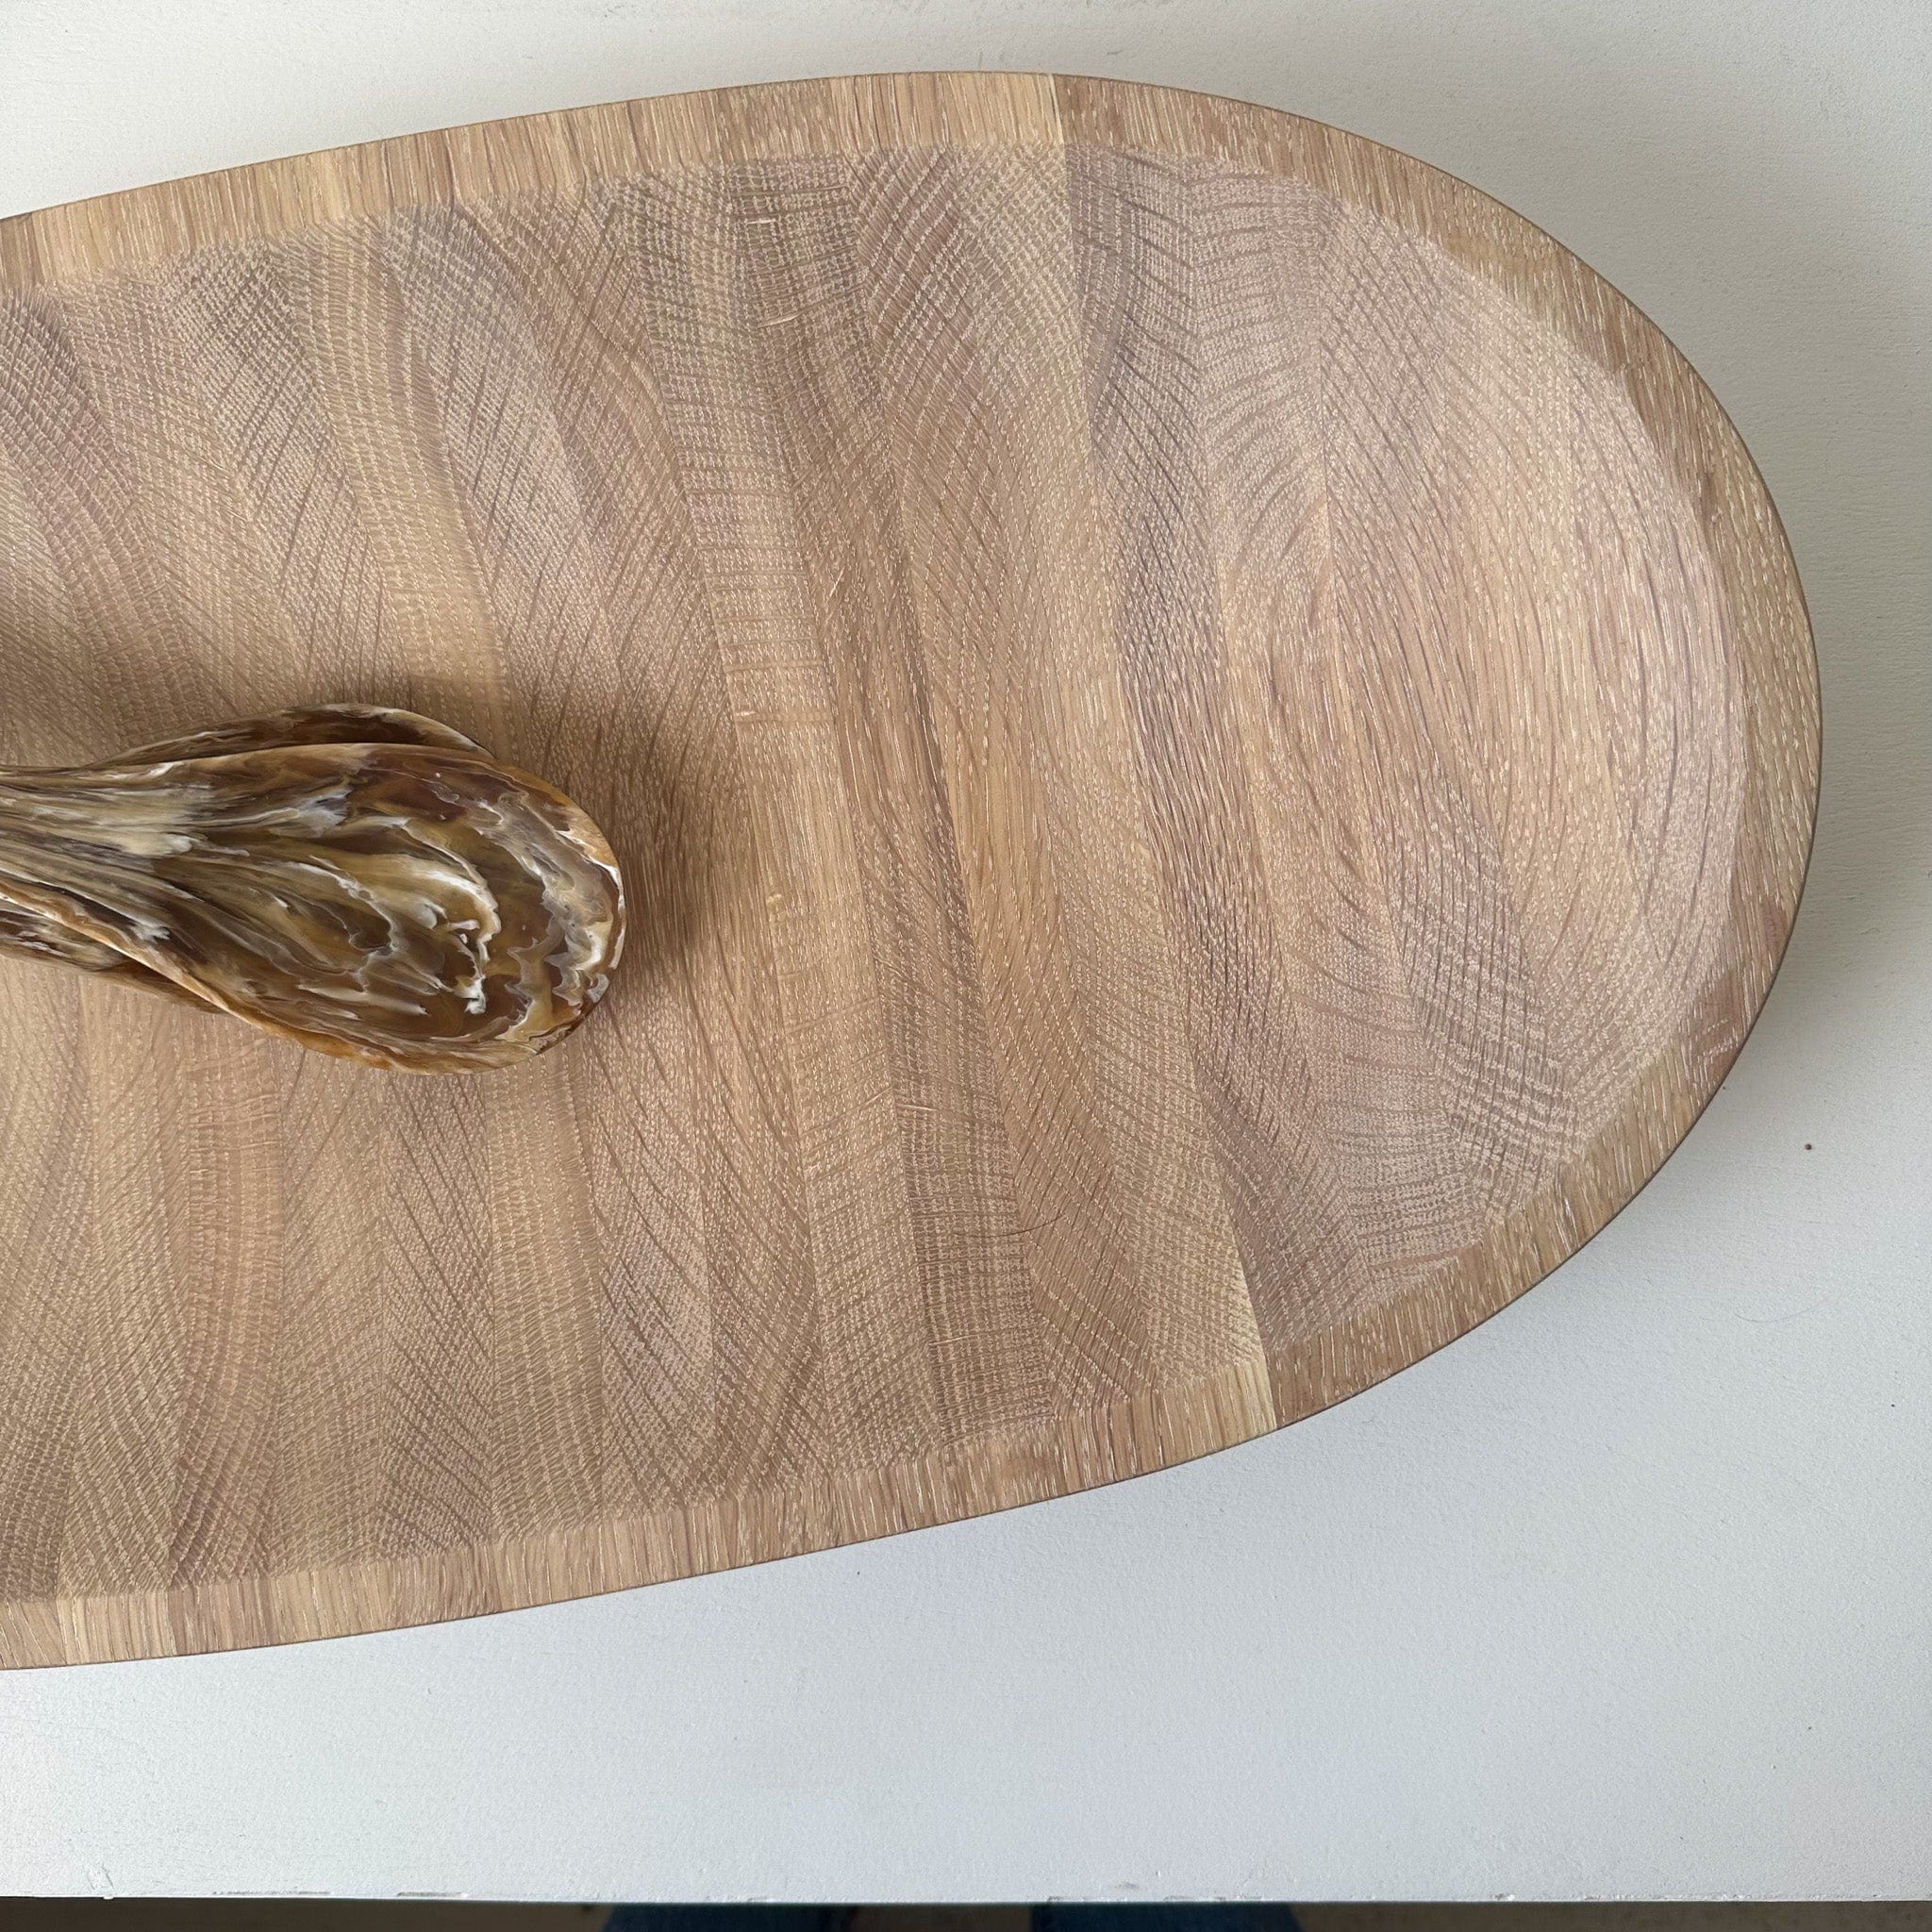 The Wooden Palate Bowls Oval Wooden Bowl from Wooden Palate